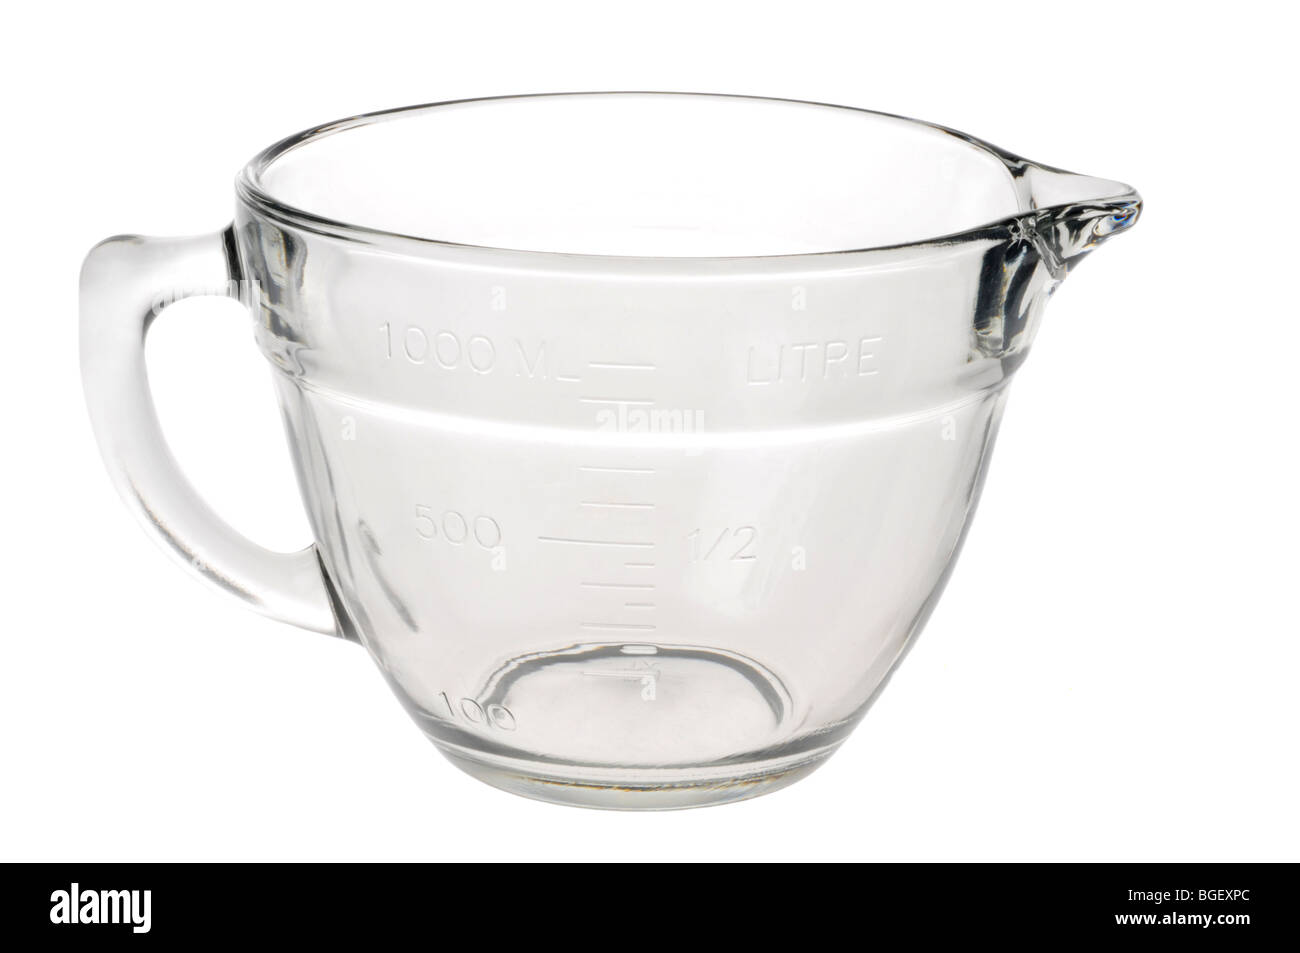 Pyrex Measuring Cup And Mixing Bowls Stock Photo - Download Image